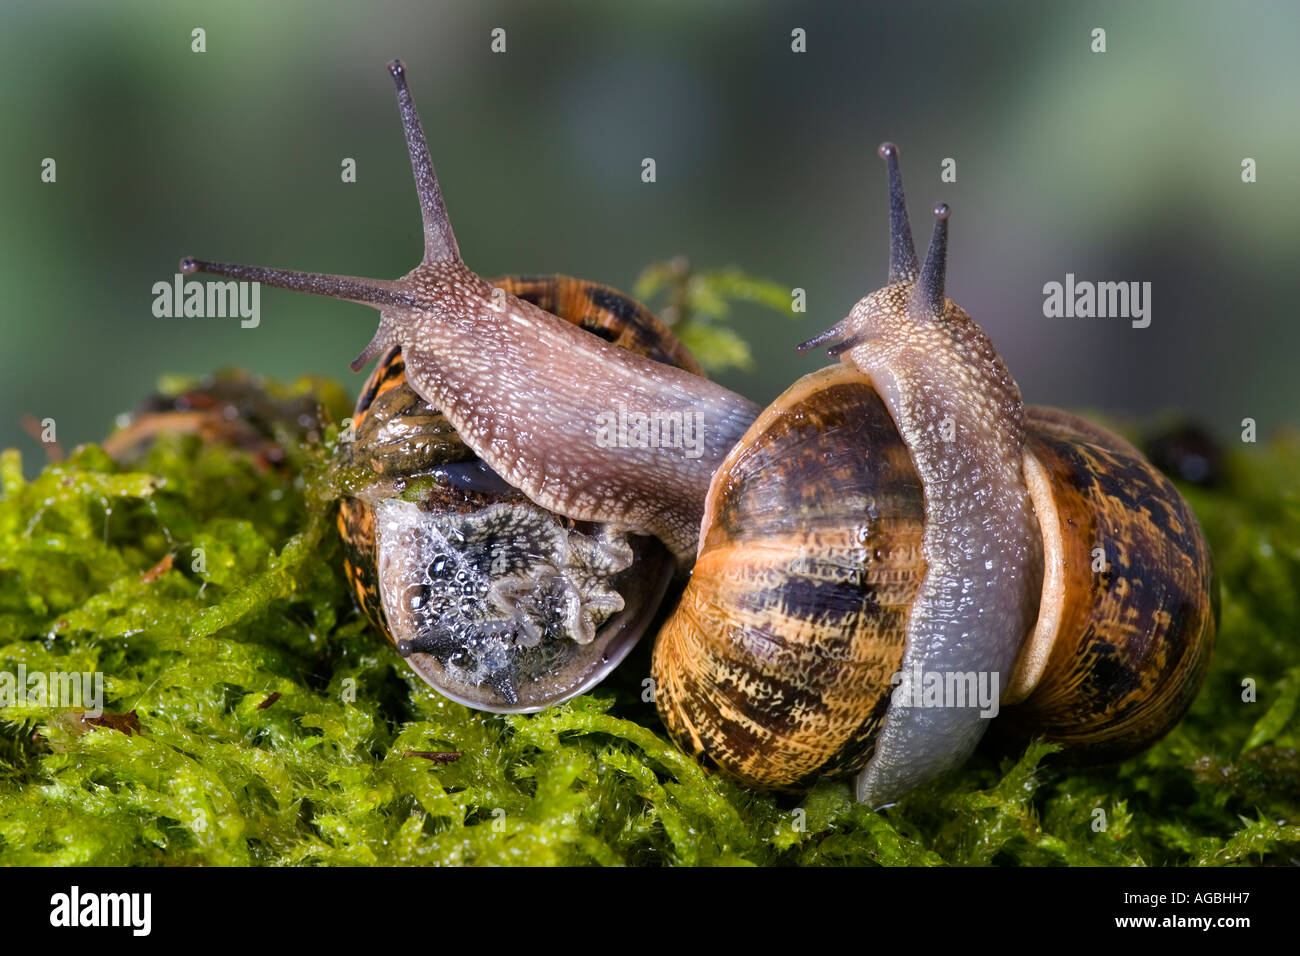 Garden snails Helix aspersa interacting before mating takes place Potton Bedfordshire Stock Photo